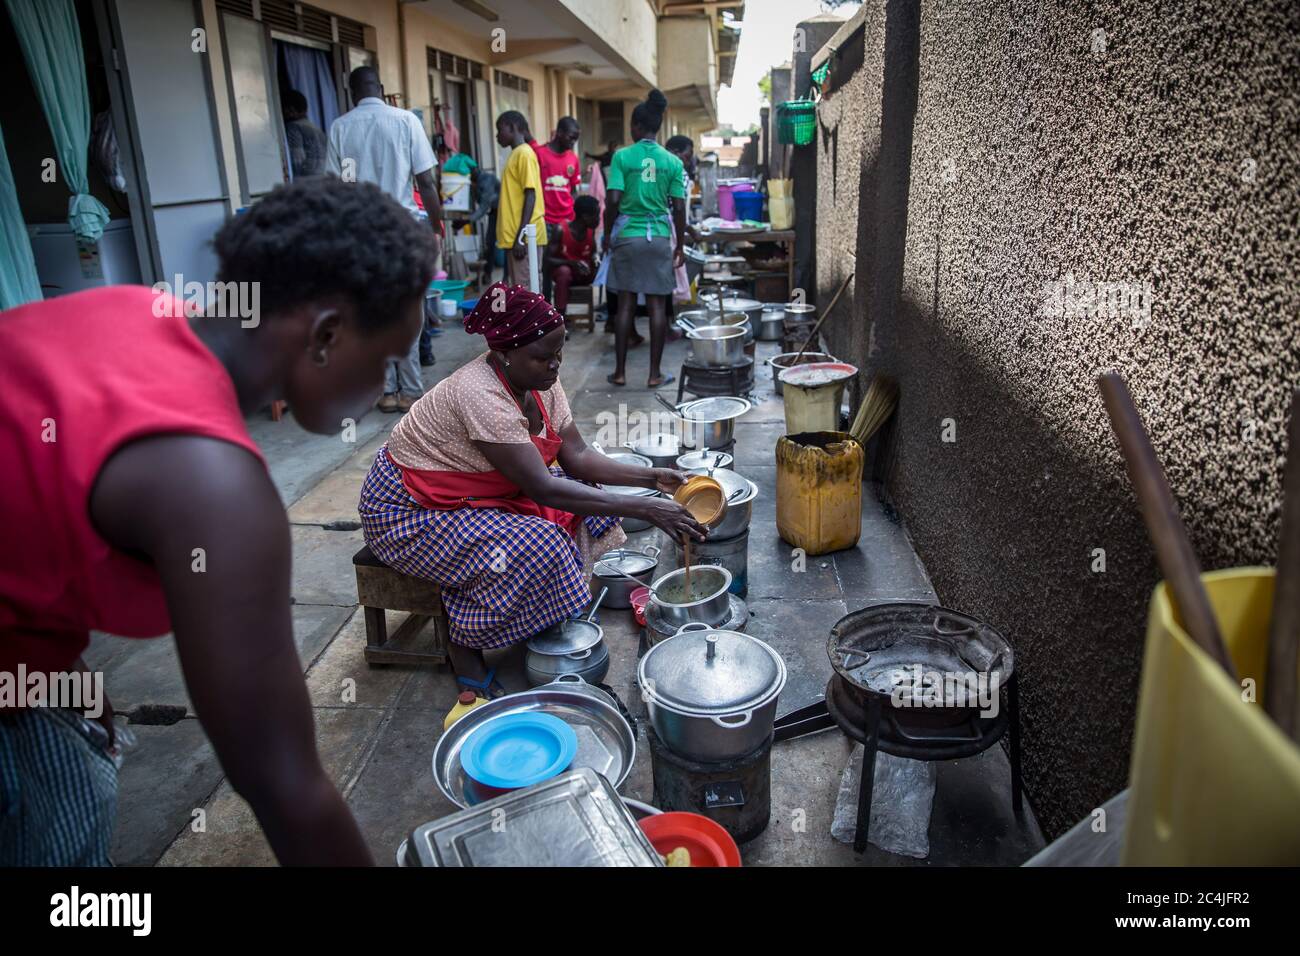 Women are seen cooking food for street children behind the main market in Gulu, northern Uganda, during Uganda's coronavirus lockdown.Hundreds of street children in Gulu, northern Uganda, have been put in danger, with nowhere to go during a coronavirus-related lockdown, which includes a 7pm curfew. Millions of street children across the world are particularly vulnerable during the pandemic. Stock Photo